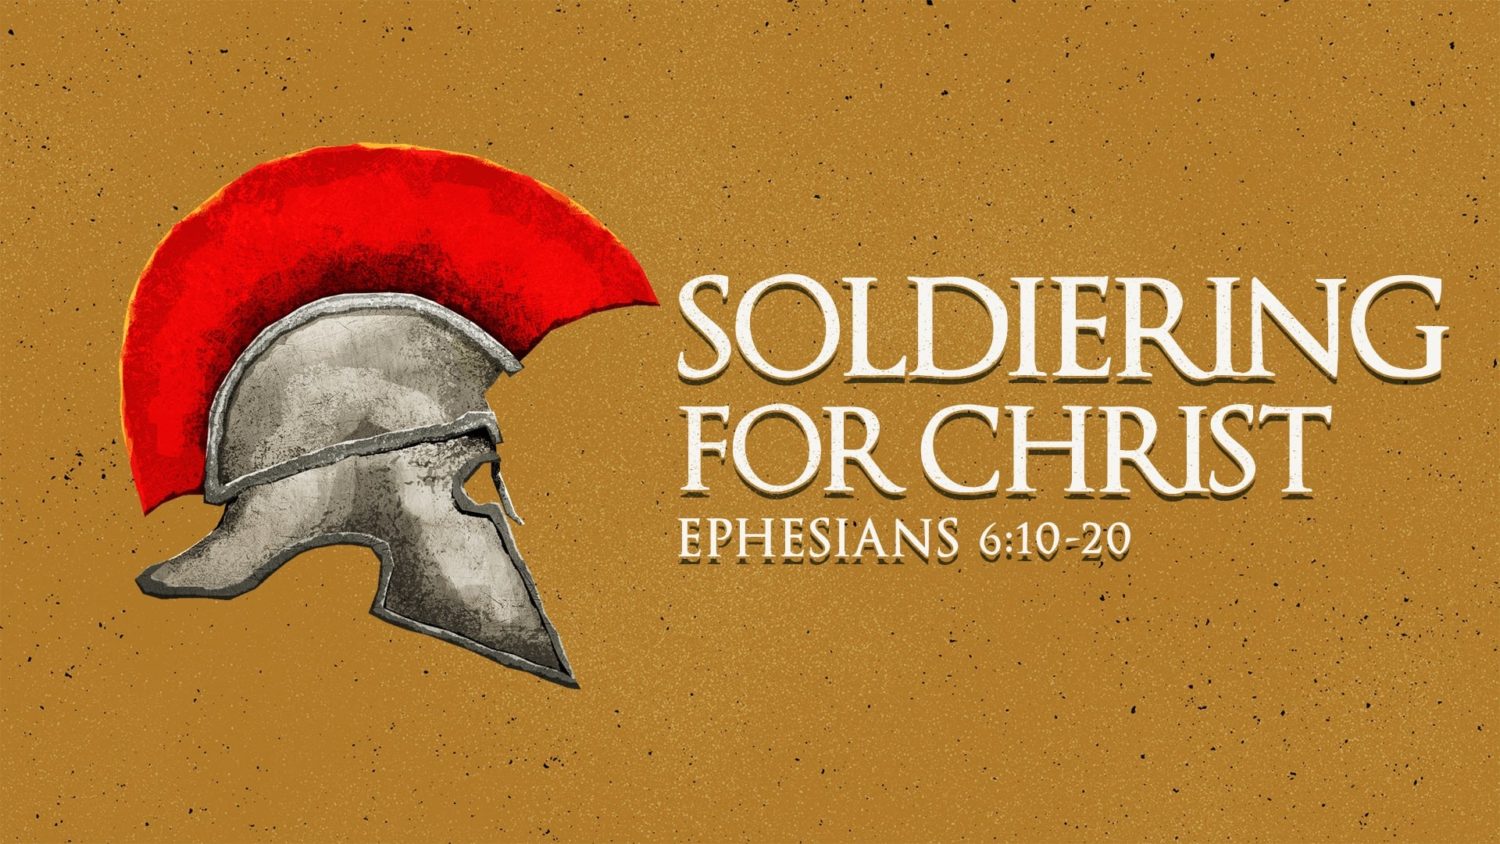 Featured image for “Soldiering for Christ”